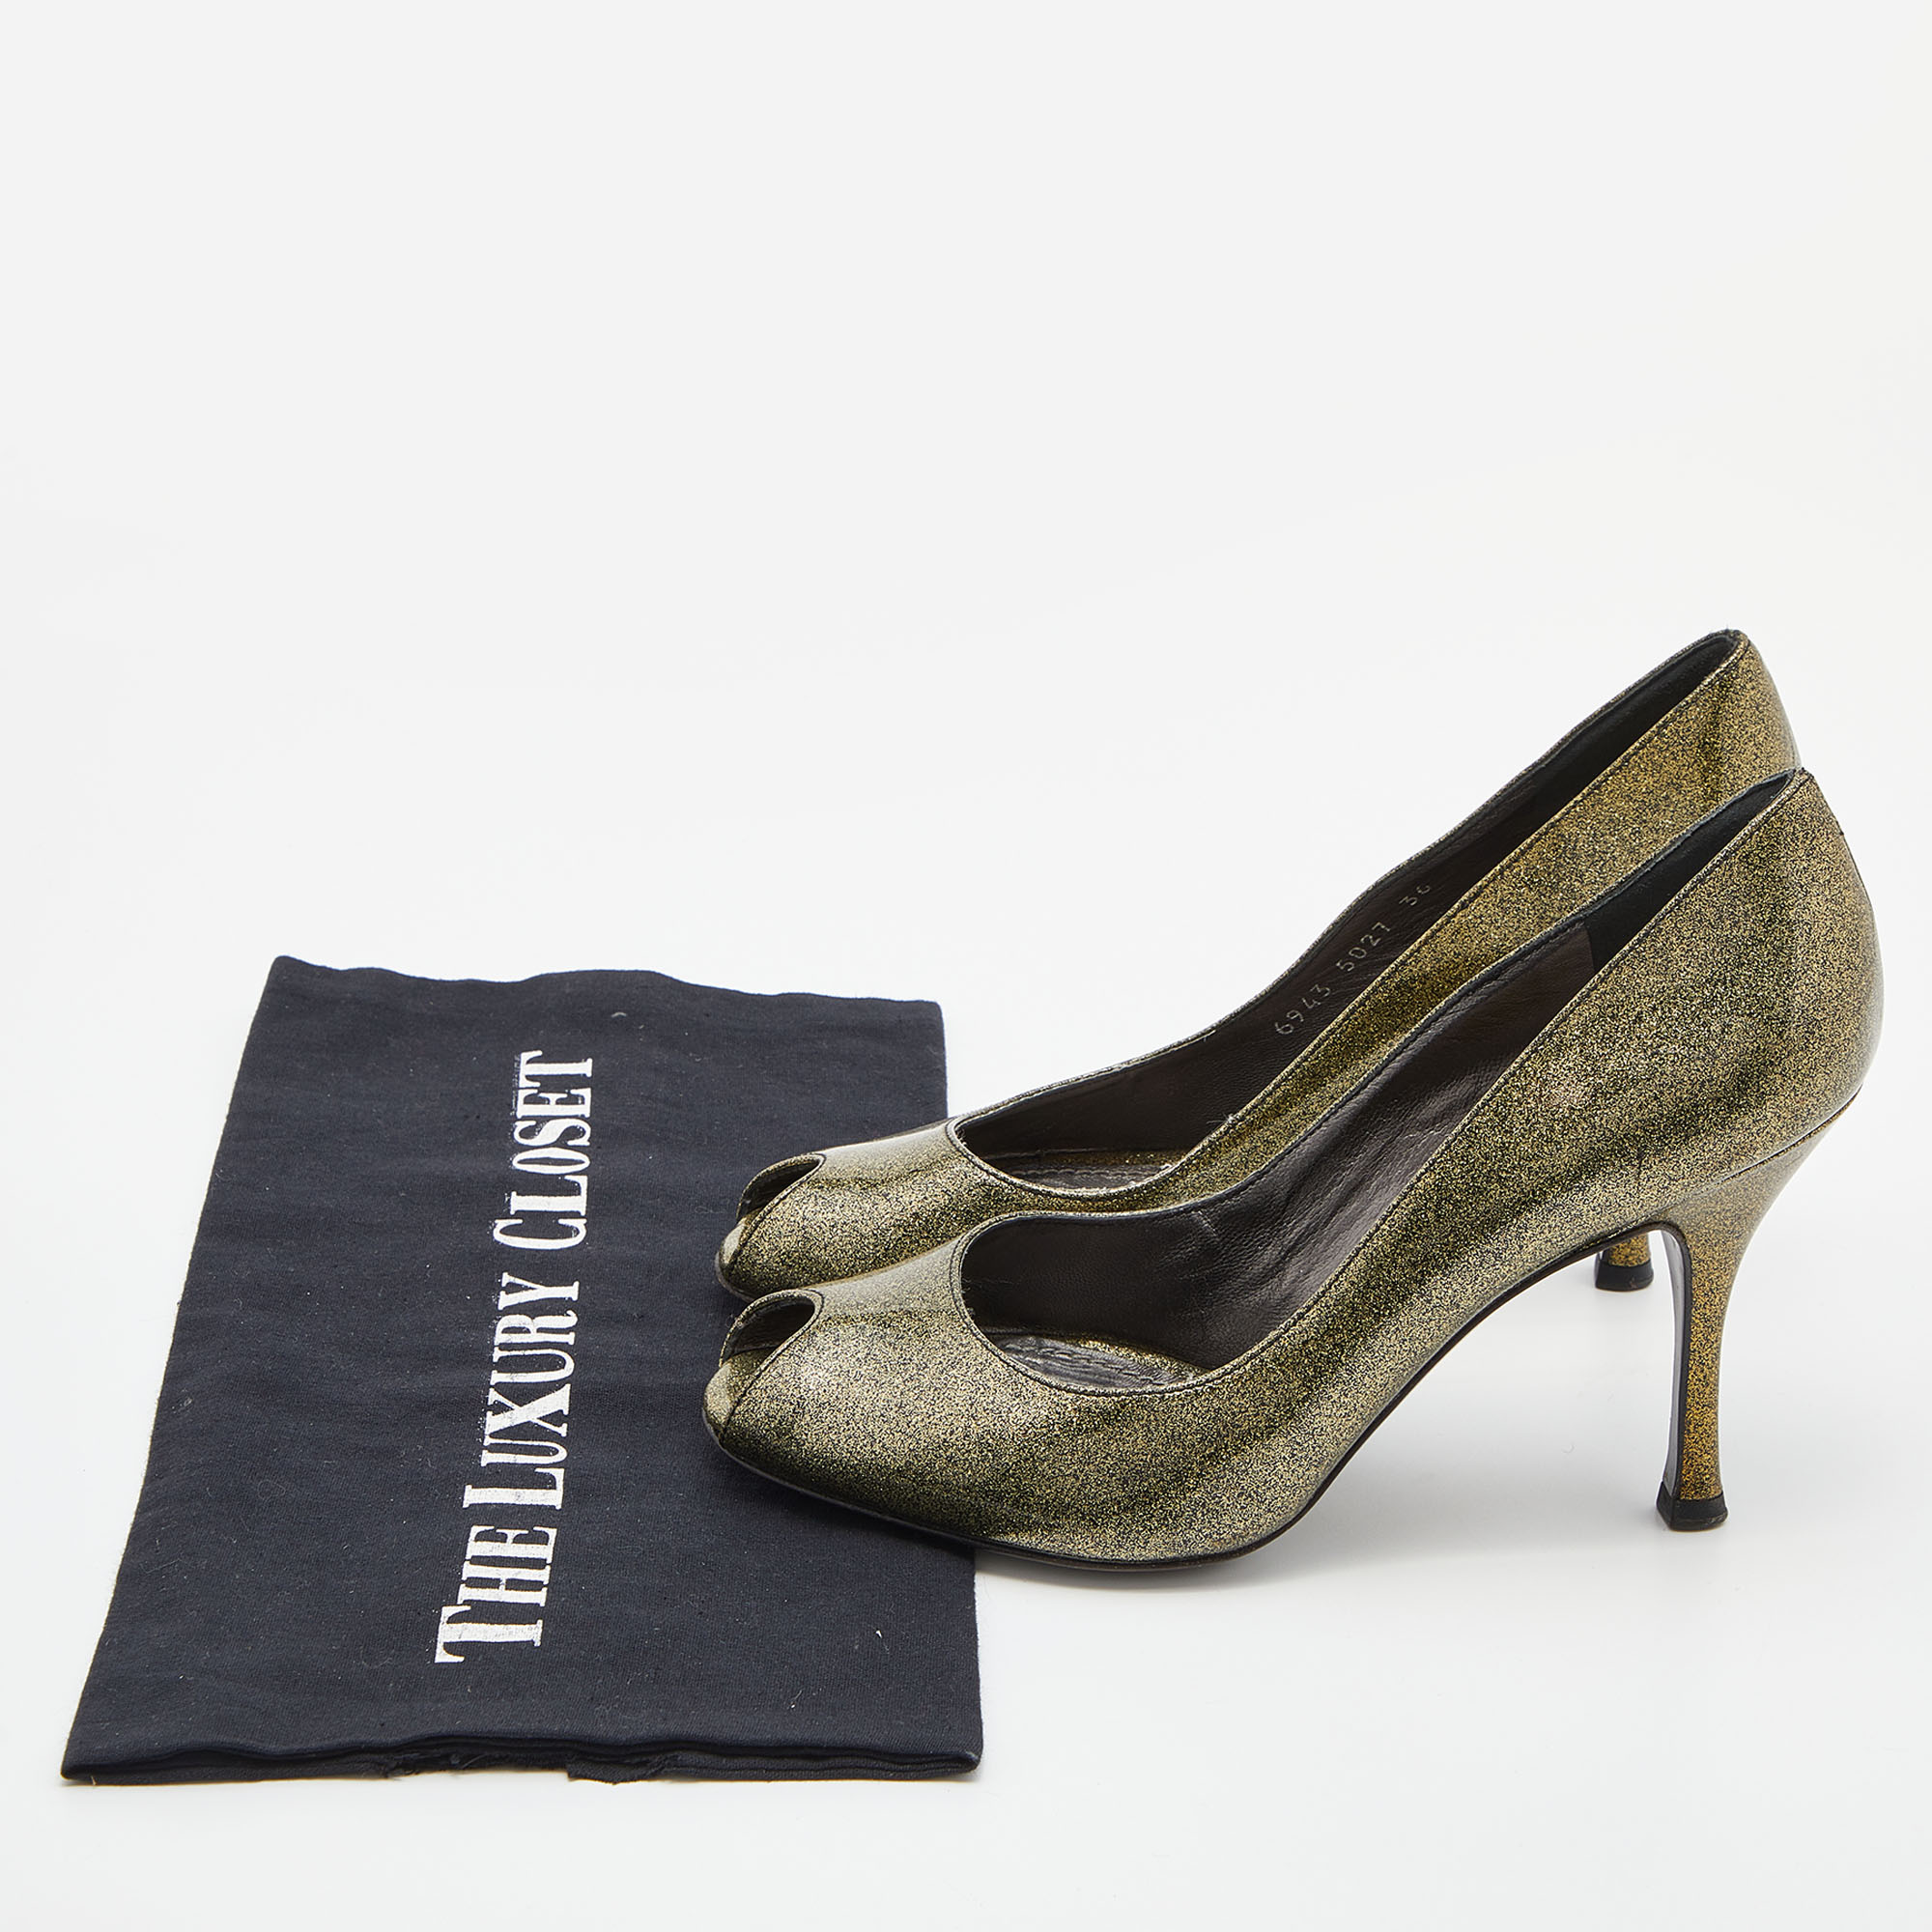 Dolce & Gabbana Olive Green Patent Leather Peep Toe Pumps Size 36